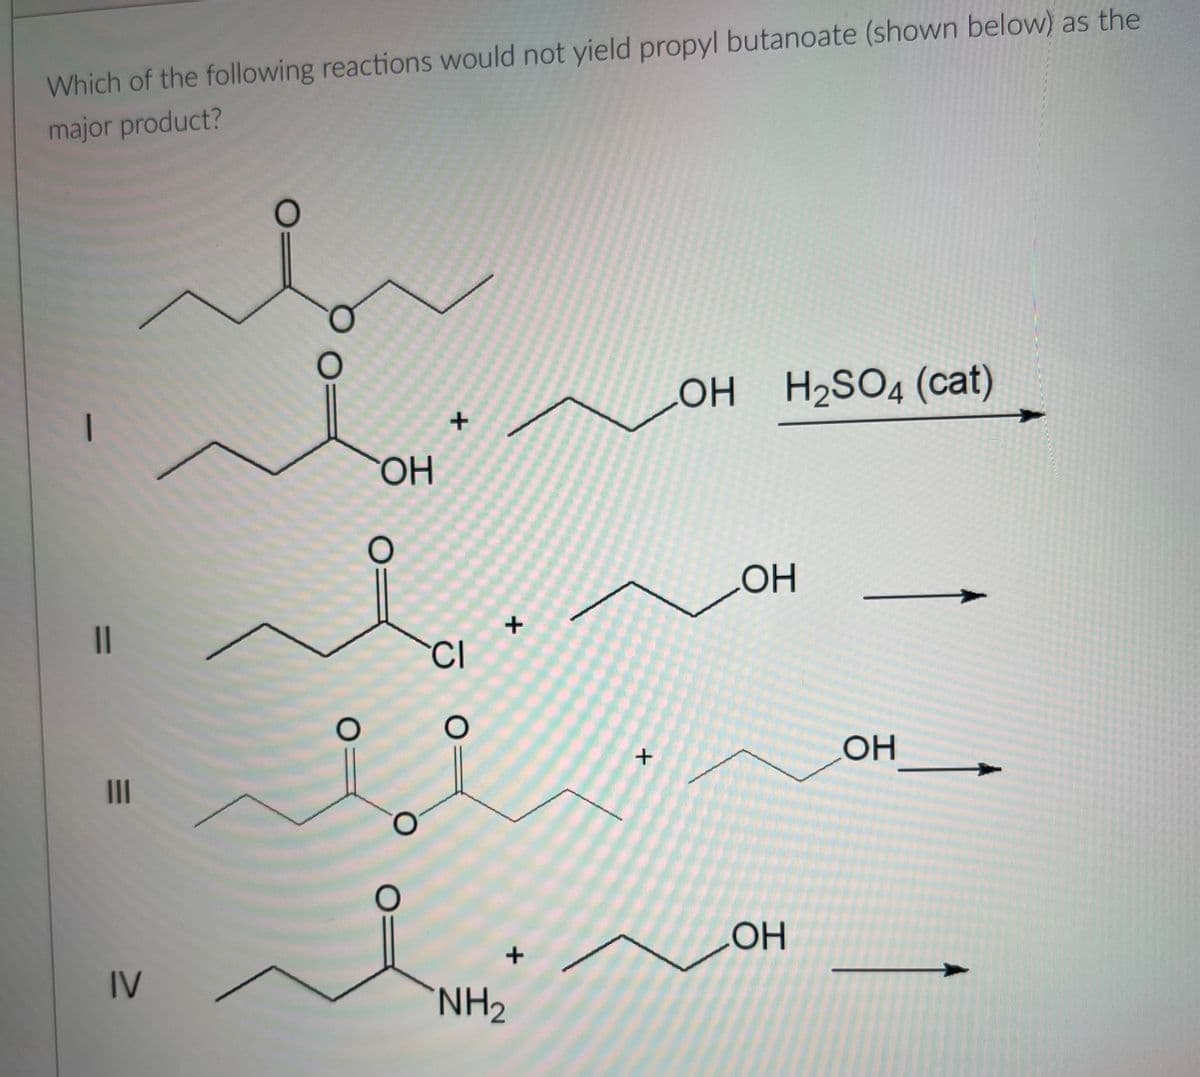 Which of the following reactions would not yield propyl butanoate (shown below) as the
major product?
—
11
|||
منہ
IV
O
OH
CI
O
+
+
NH₂
+
LOH H₂SO4 (cat)
OH
OH
OH